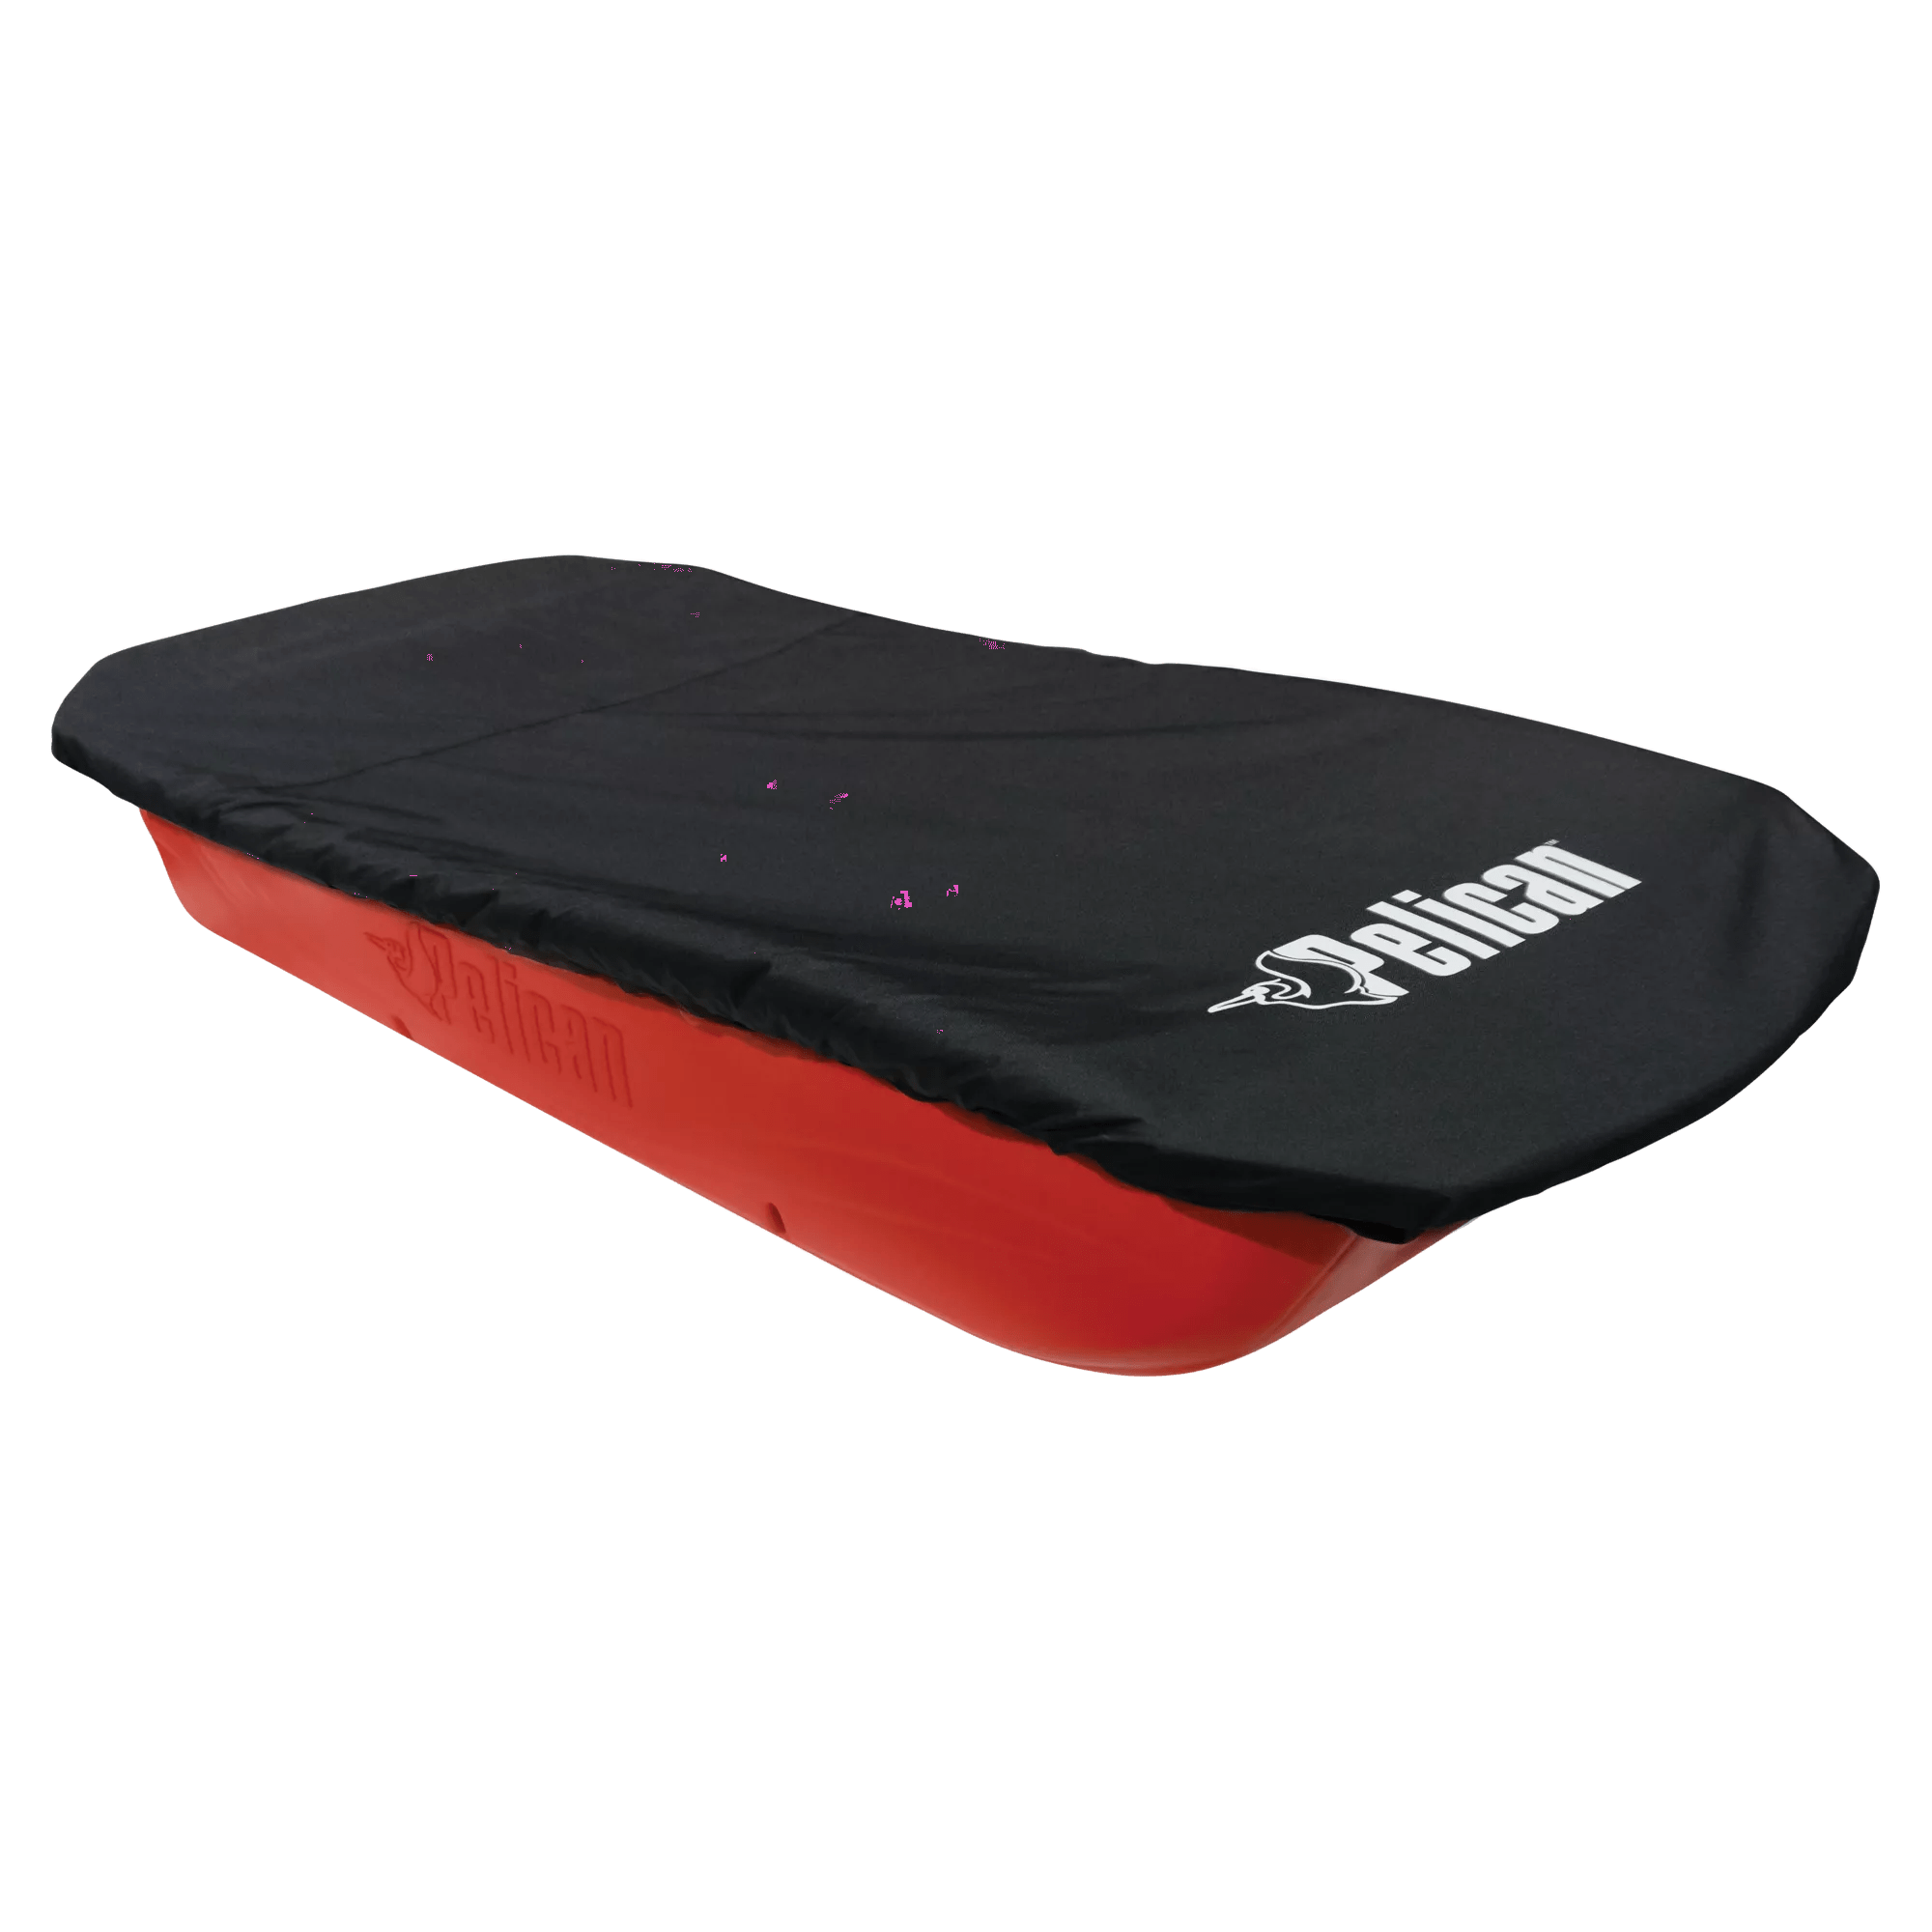 PELICAN - Trek Sport 68 Utility Sled with Ram-X Runners, Tow Hitch, Travel Cover & D-Ring Anchors and Straps - Red - LHT68PB12-00 - ISO 